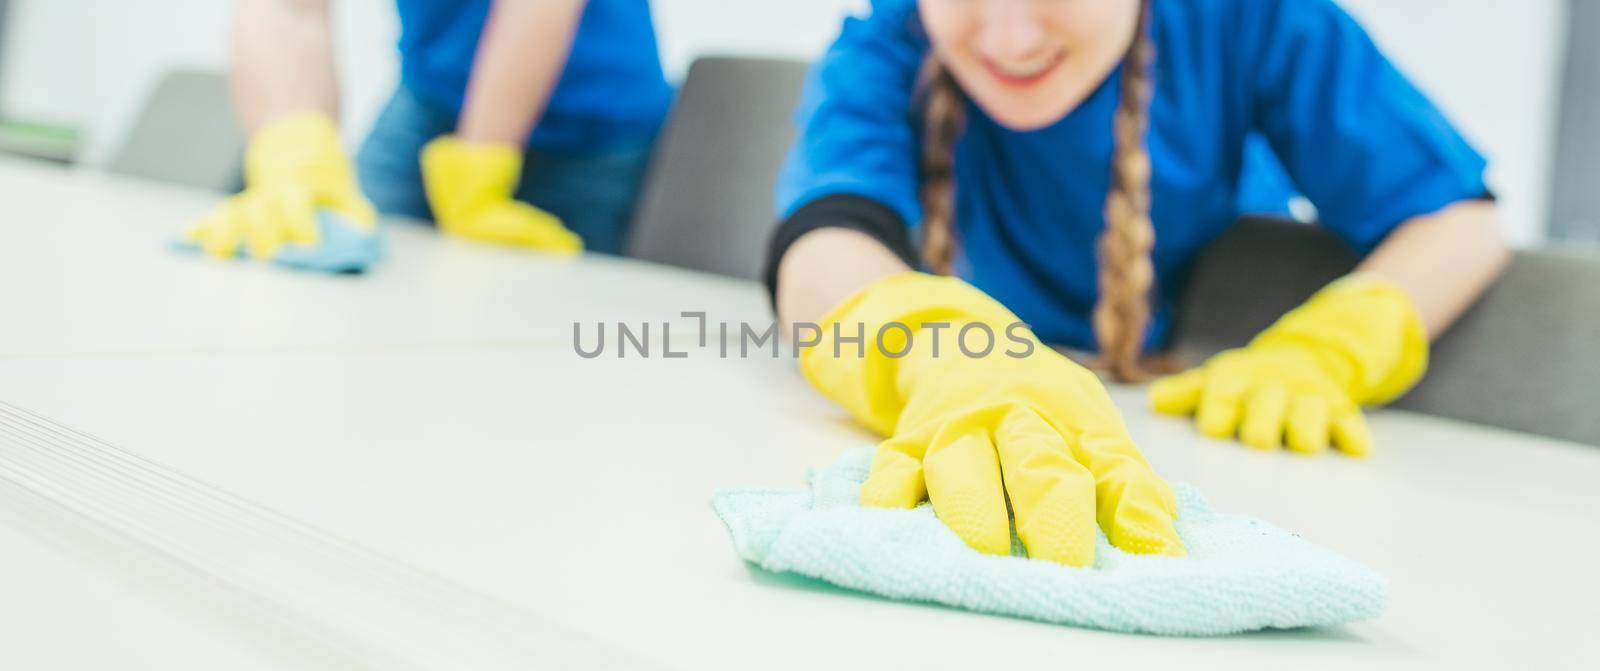 Close-up of cleaning team working in an office, banner cut